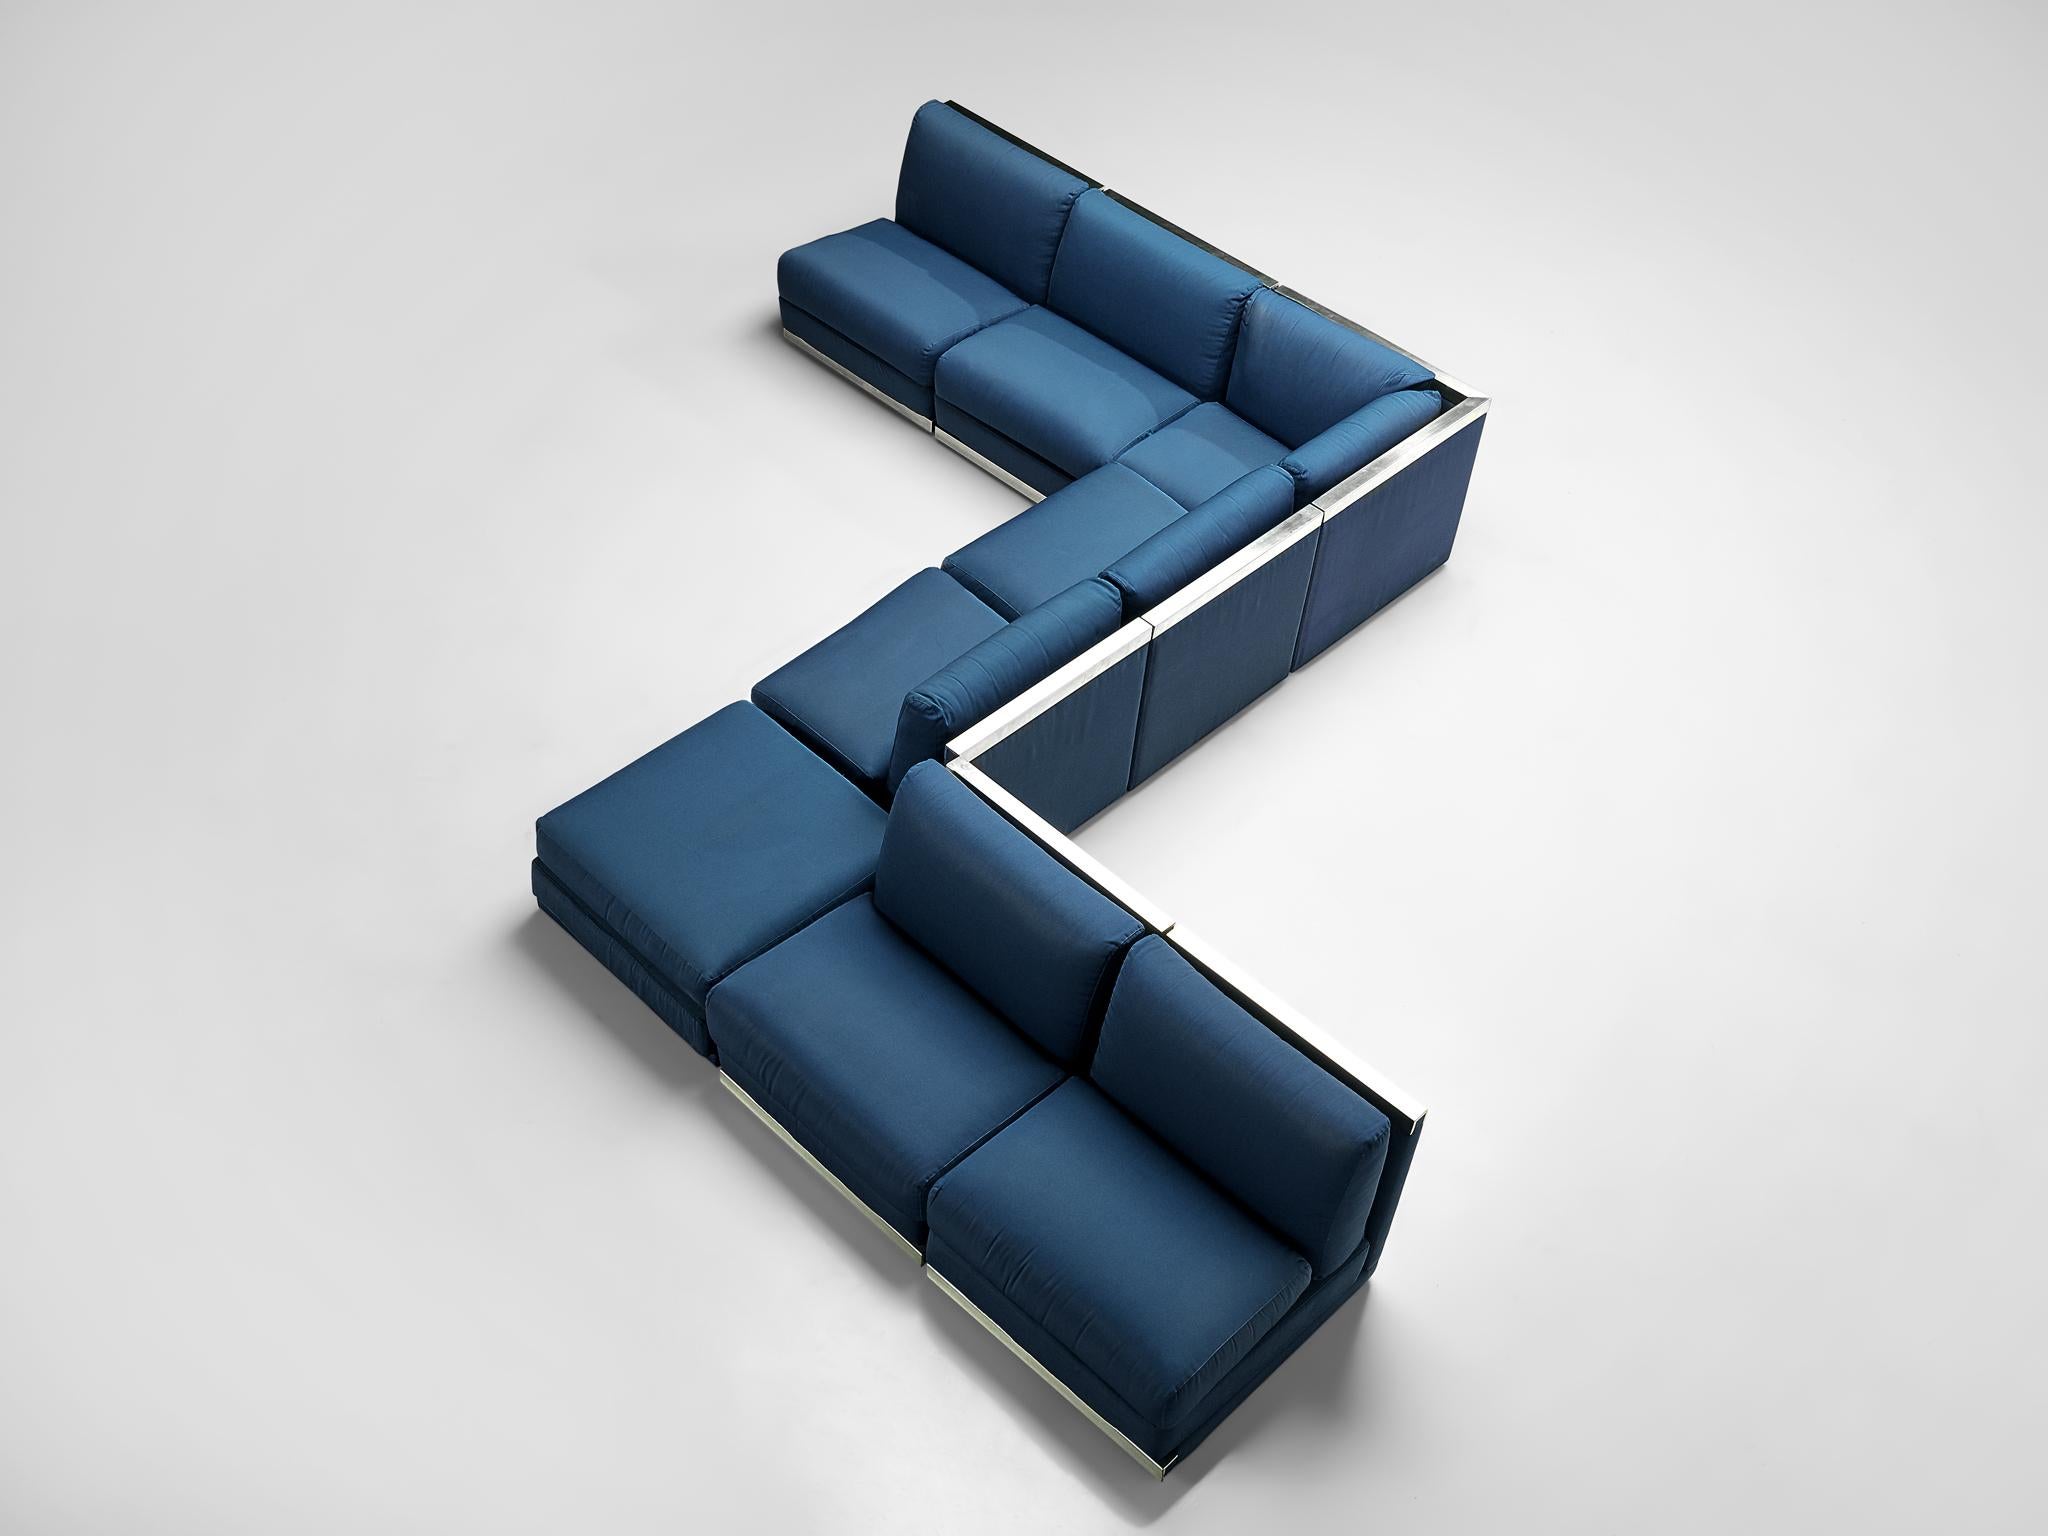 Sectional sofa, cobalt blue fabric upholstery, aluminum, Italy, 1980s

Large Postmodern modular sofa, consisting of 6 straight seating elements, one corner and an element without backrest usable as a side table or ottoman. A perfect piece to place